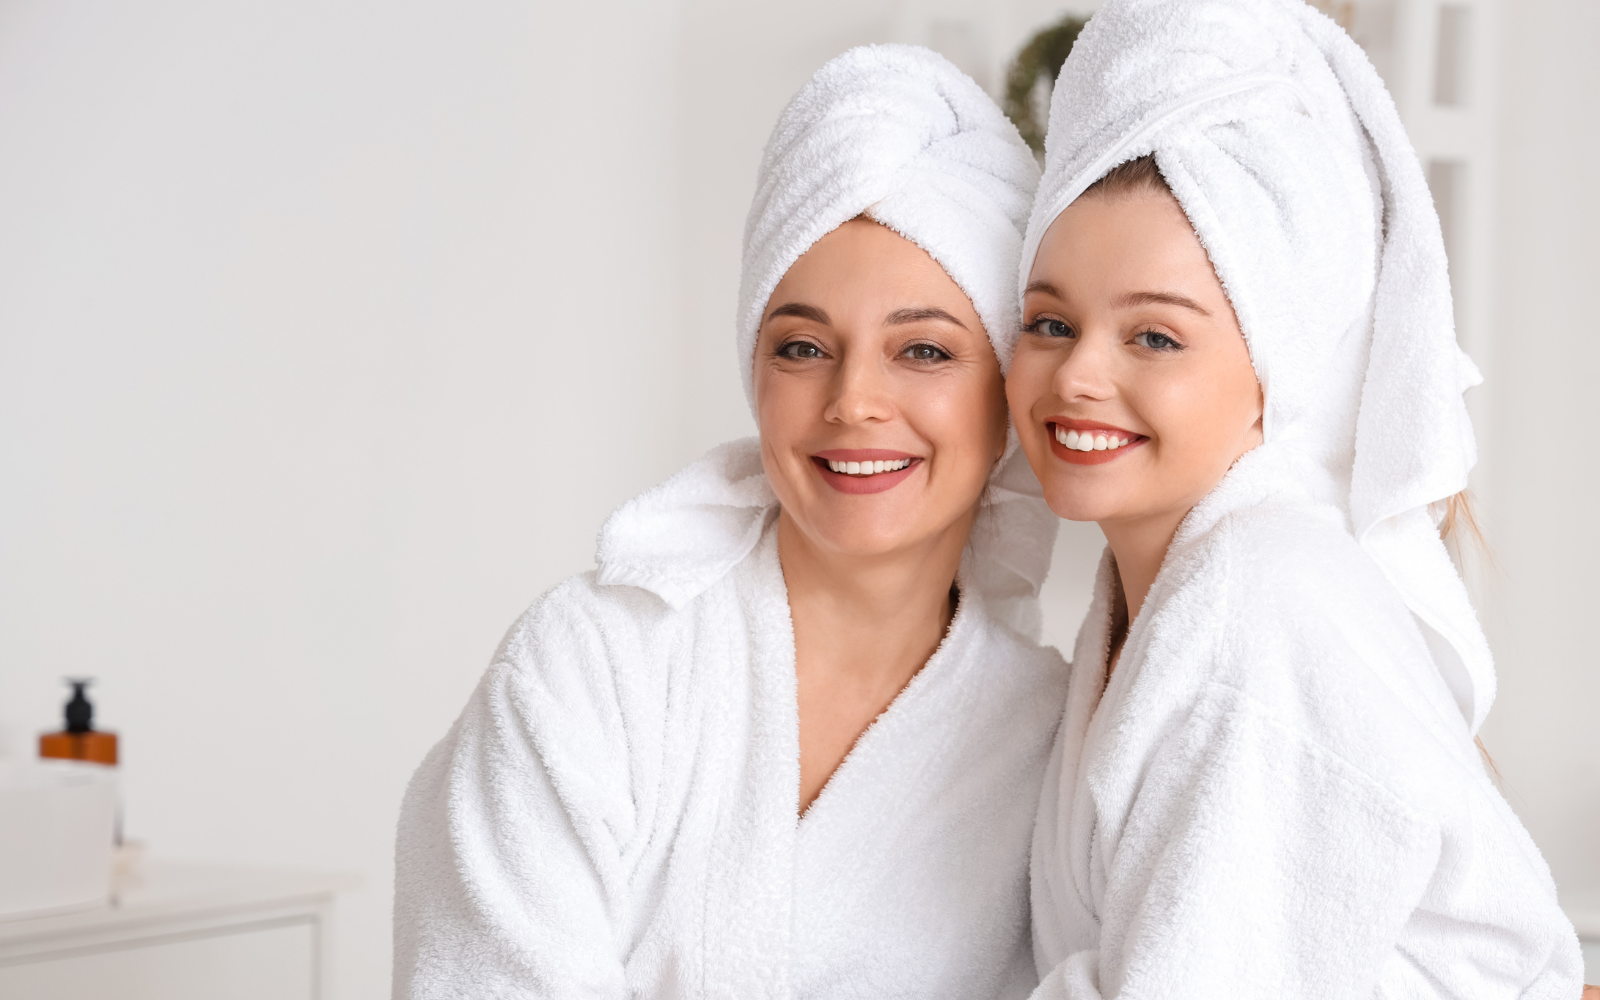 TREAT MOM TO A SPA DAY